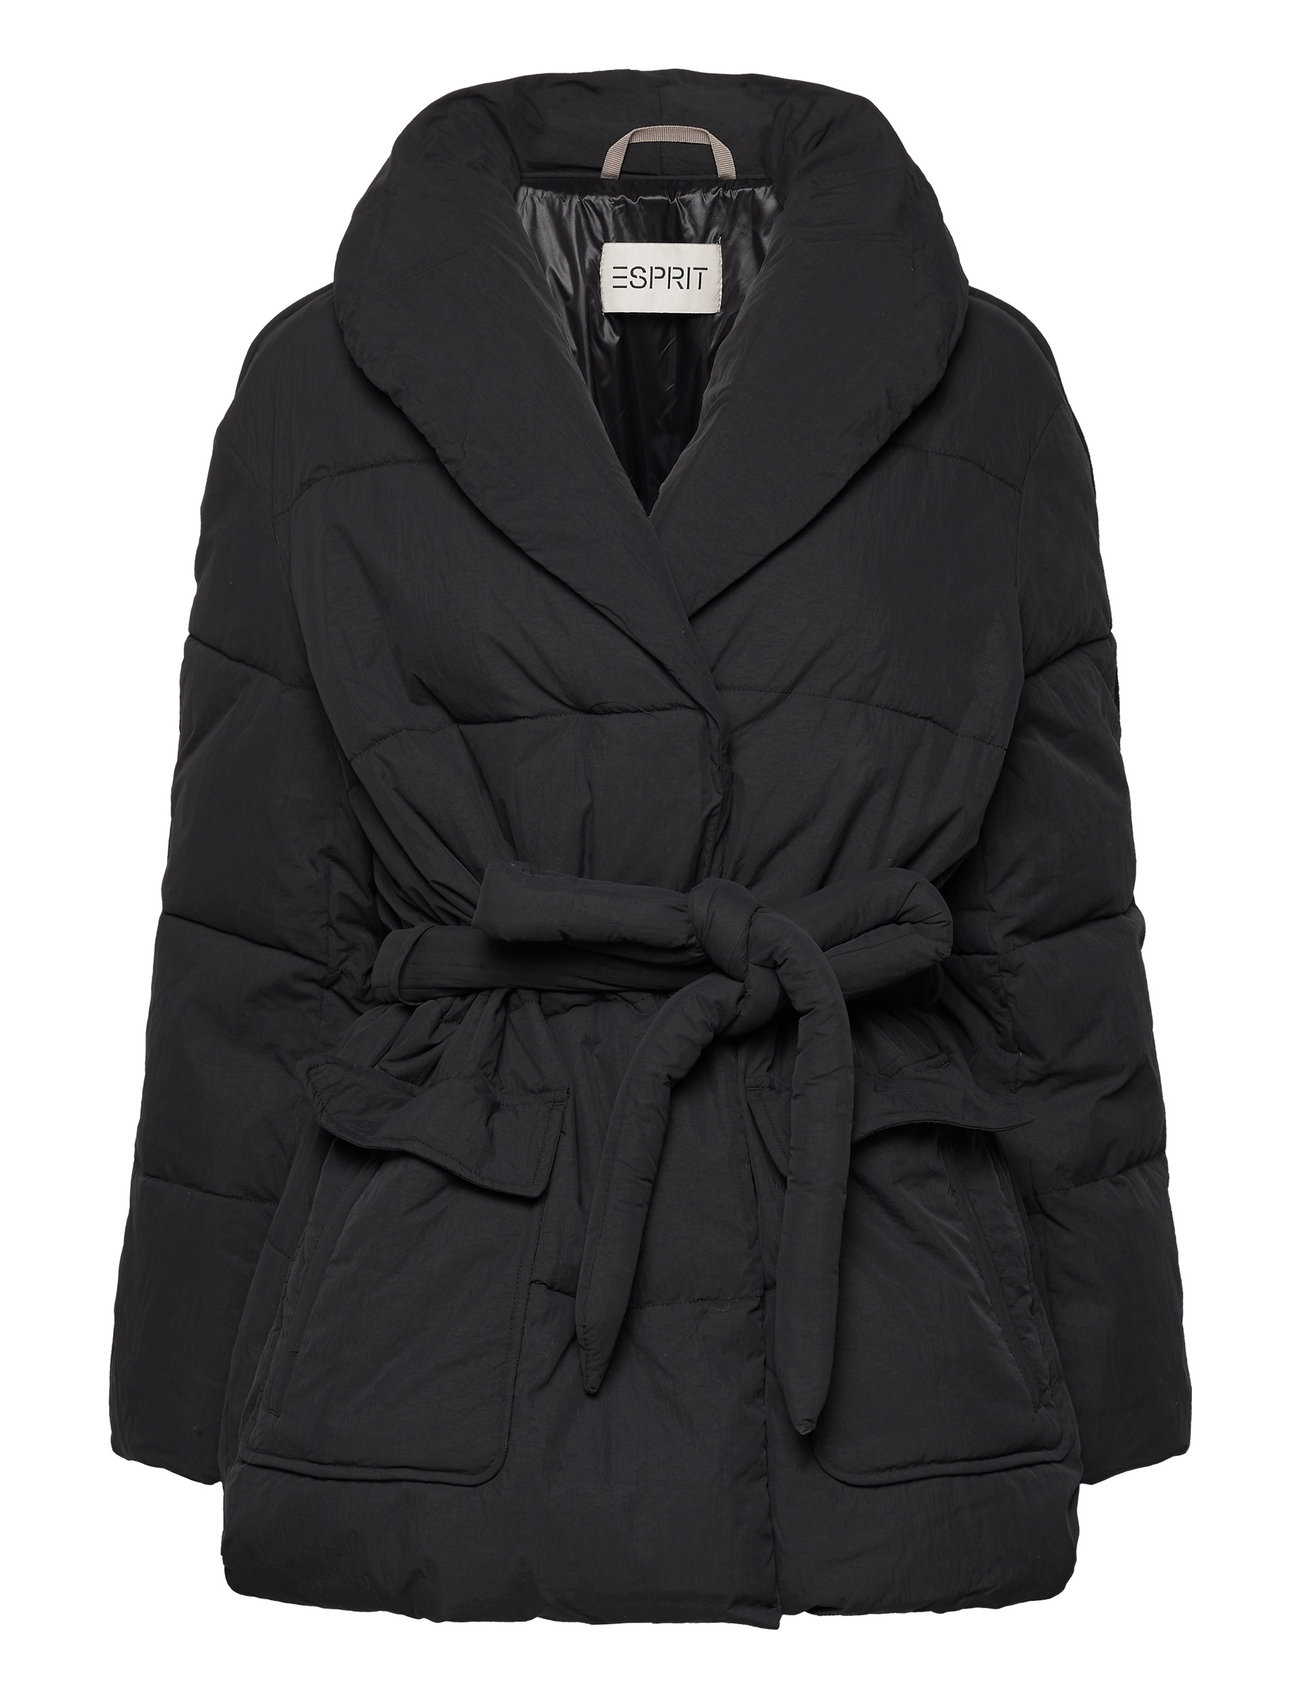 Esprit Quilted Puffer Coats & Jackets for Women